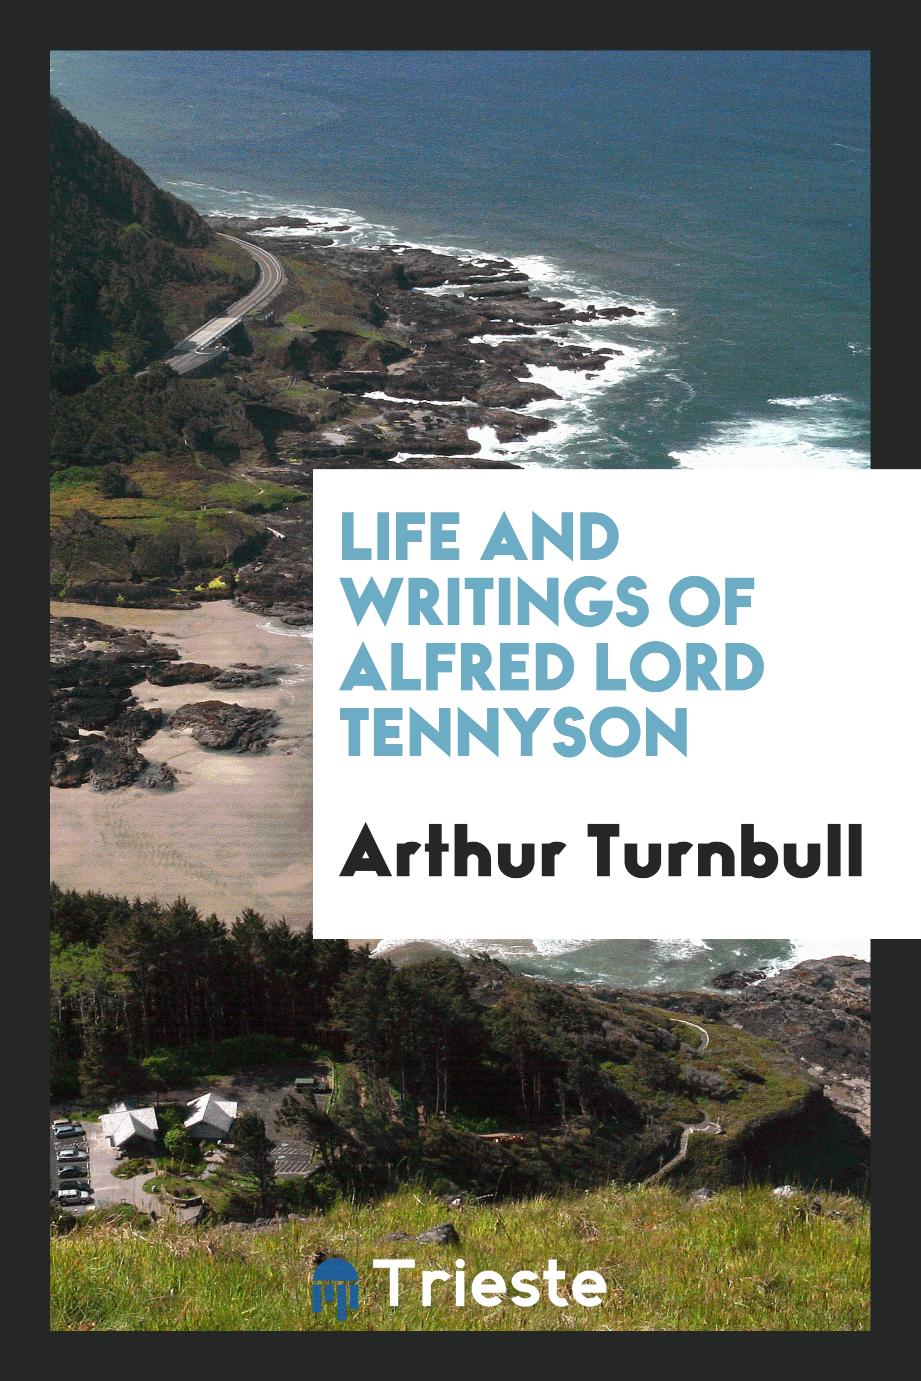 Life and writings of Alfred Lord Tennyson